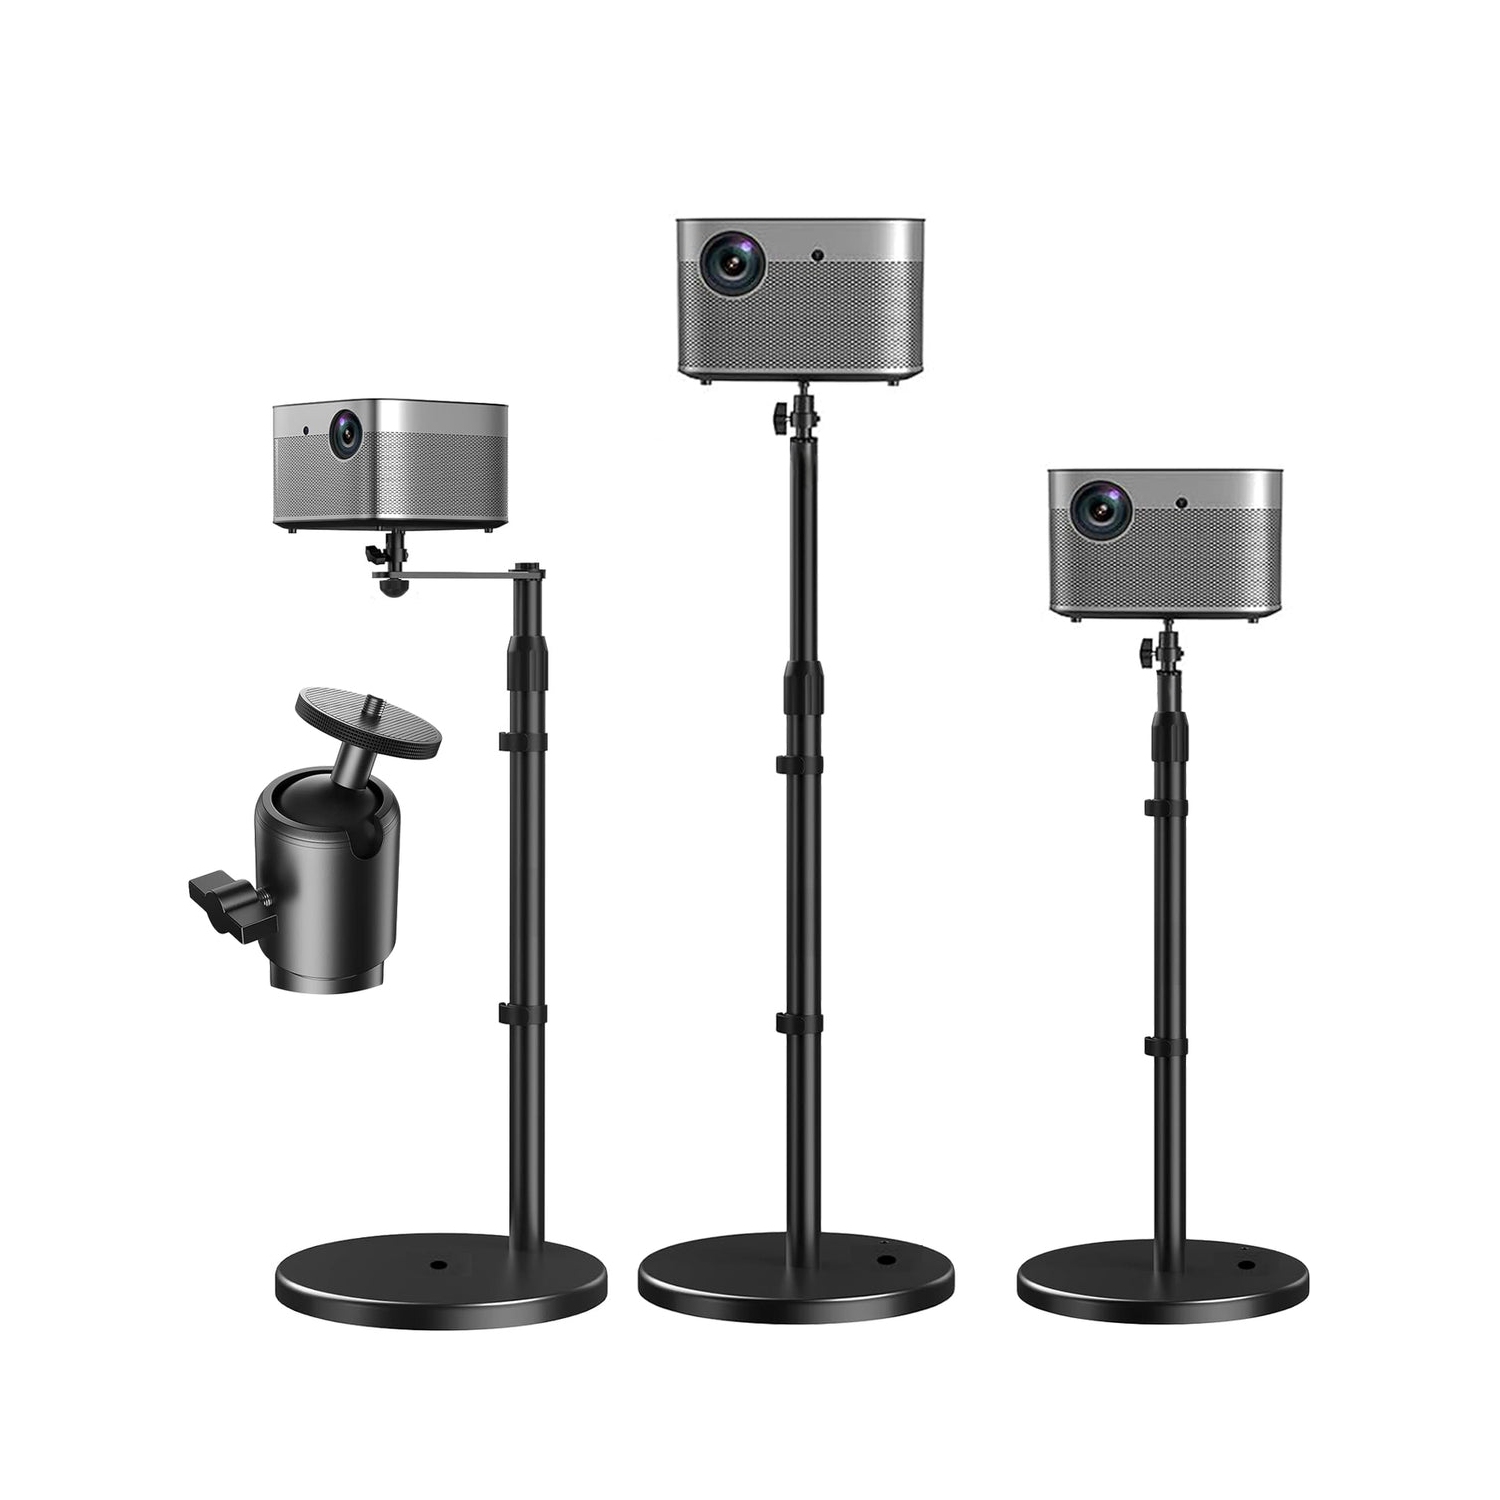 5 Core Projector Stand Height adjustable 28"-52" Tall Floor Stands w 3 Mounting Options 360° Rotatable Ball Head Heavy Duty Multipurpose Soporte Para Proyector for Home Office